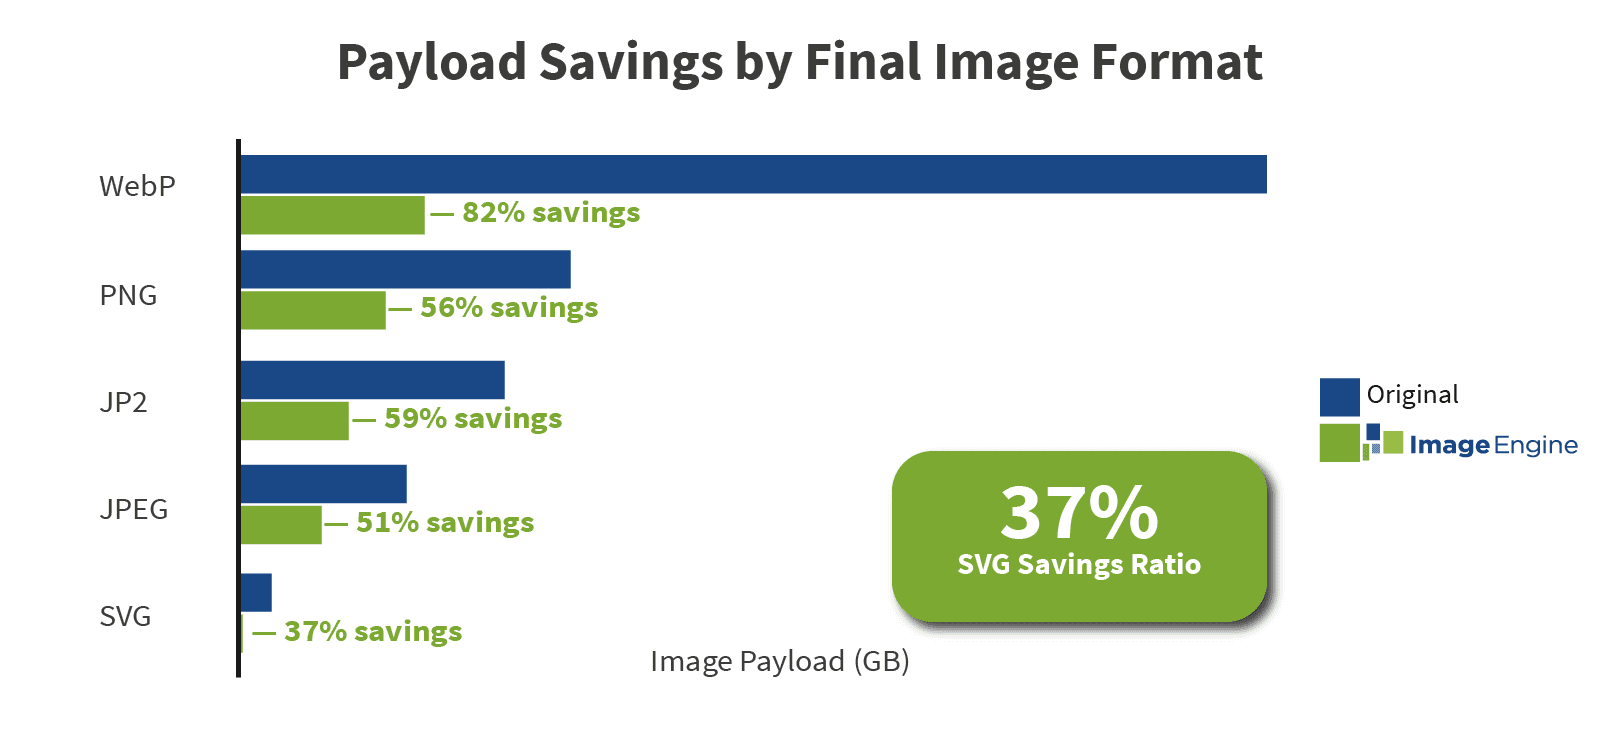 Payload Savings by Final Image Format